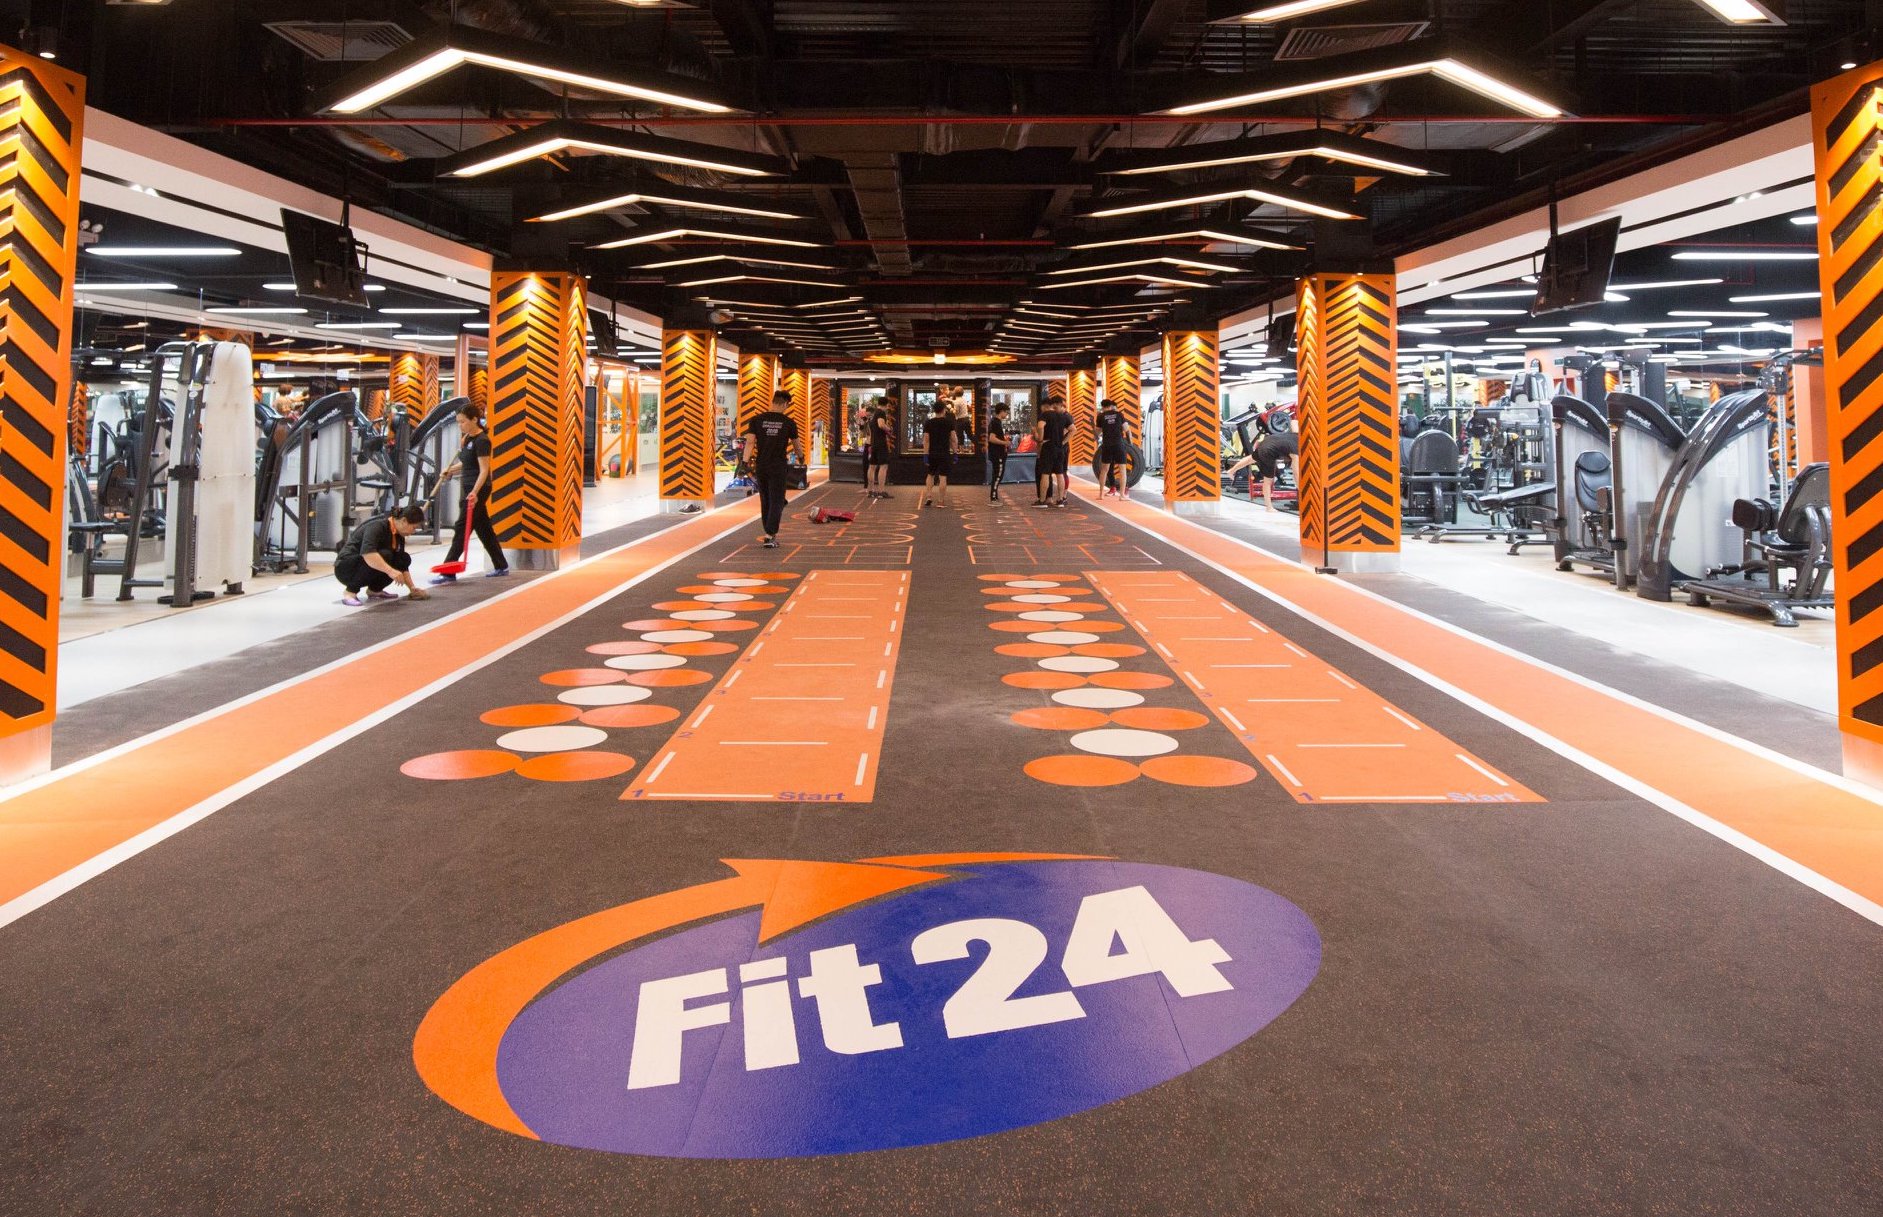 Fit24 is a well-established fitness chain